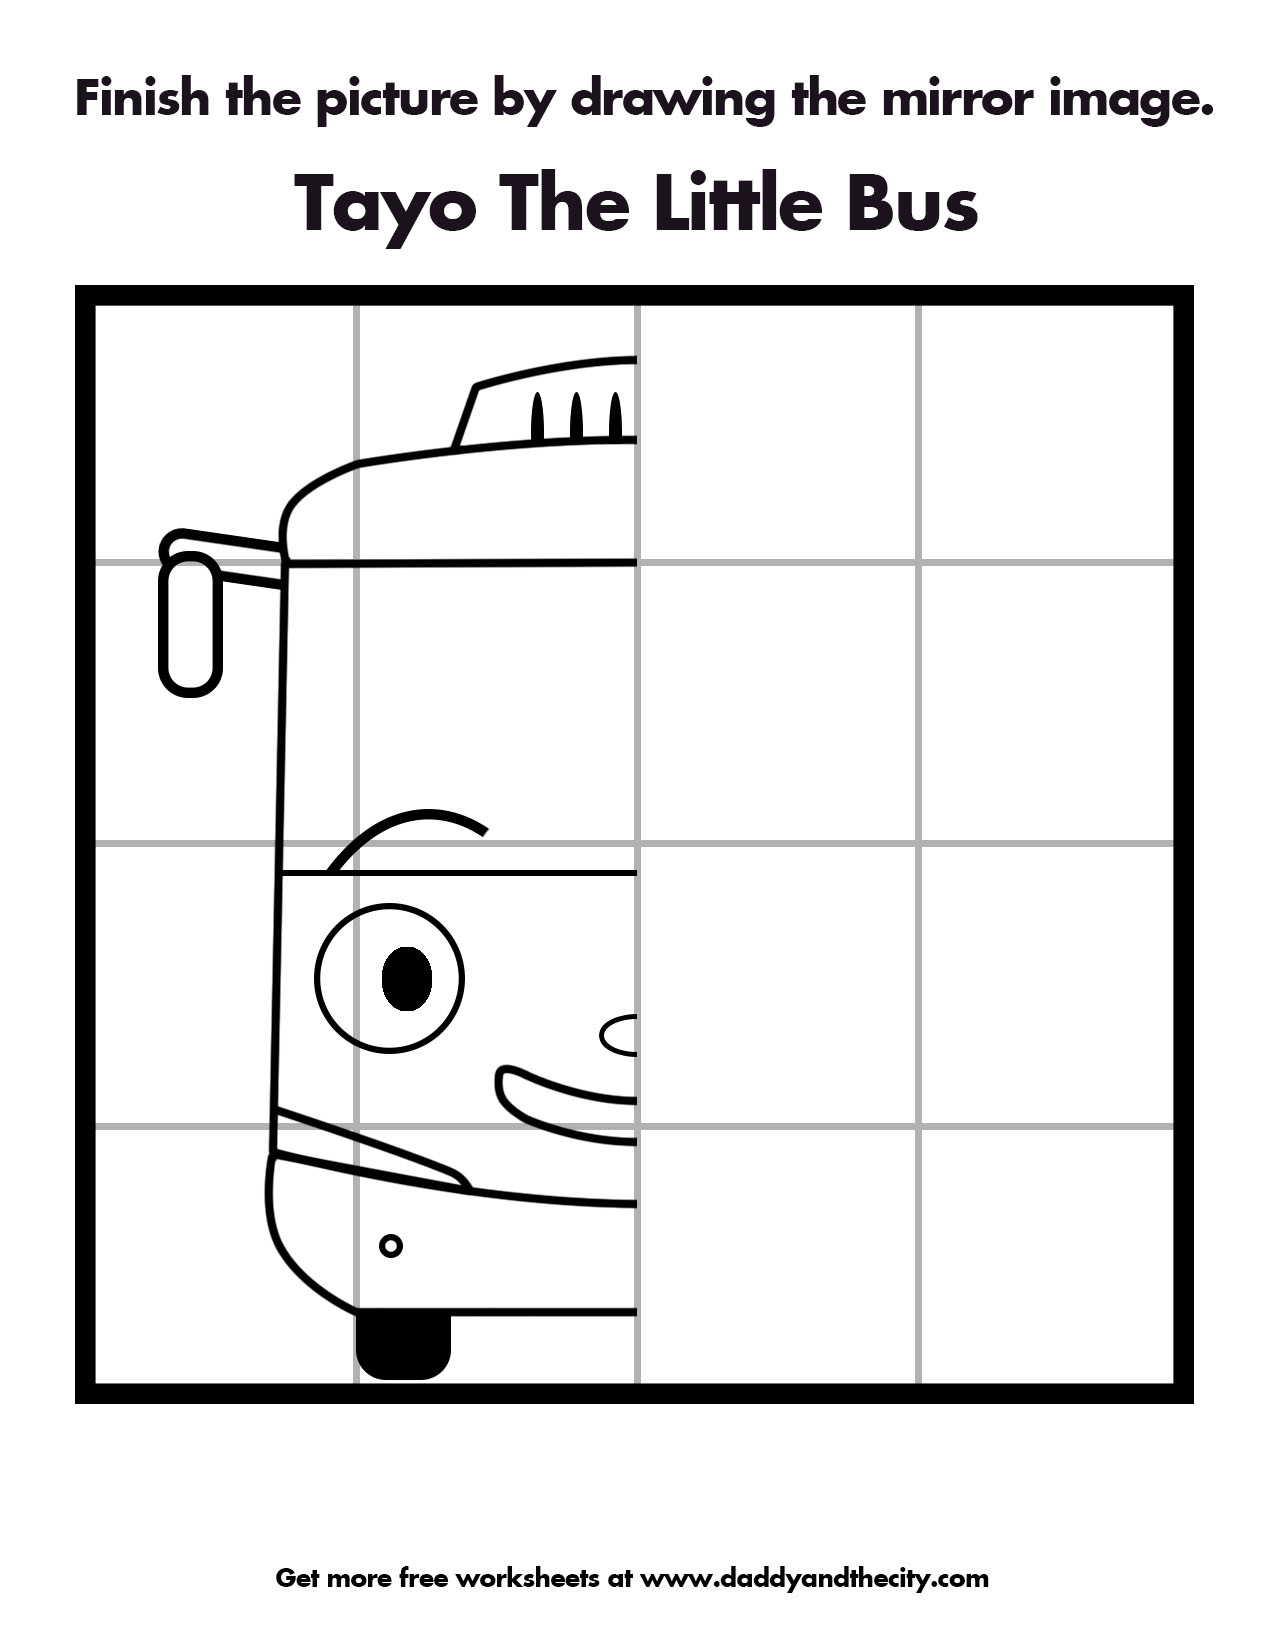 Tayo the little Bus drawing